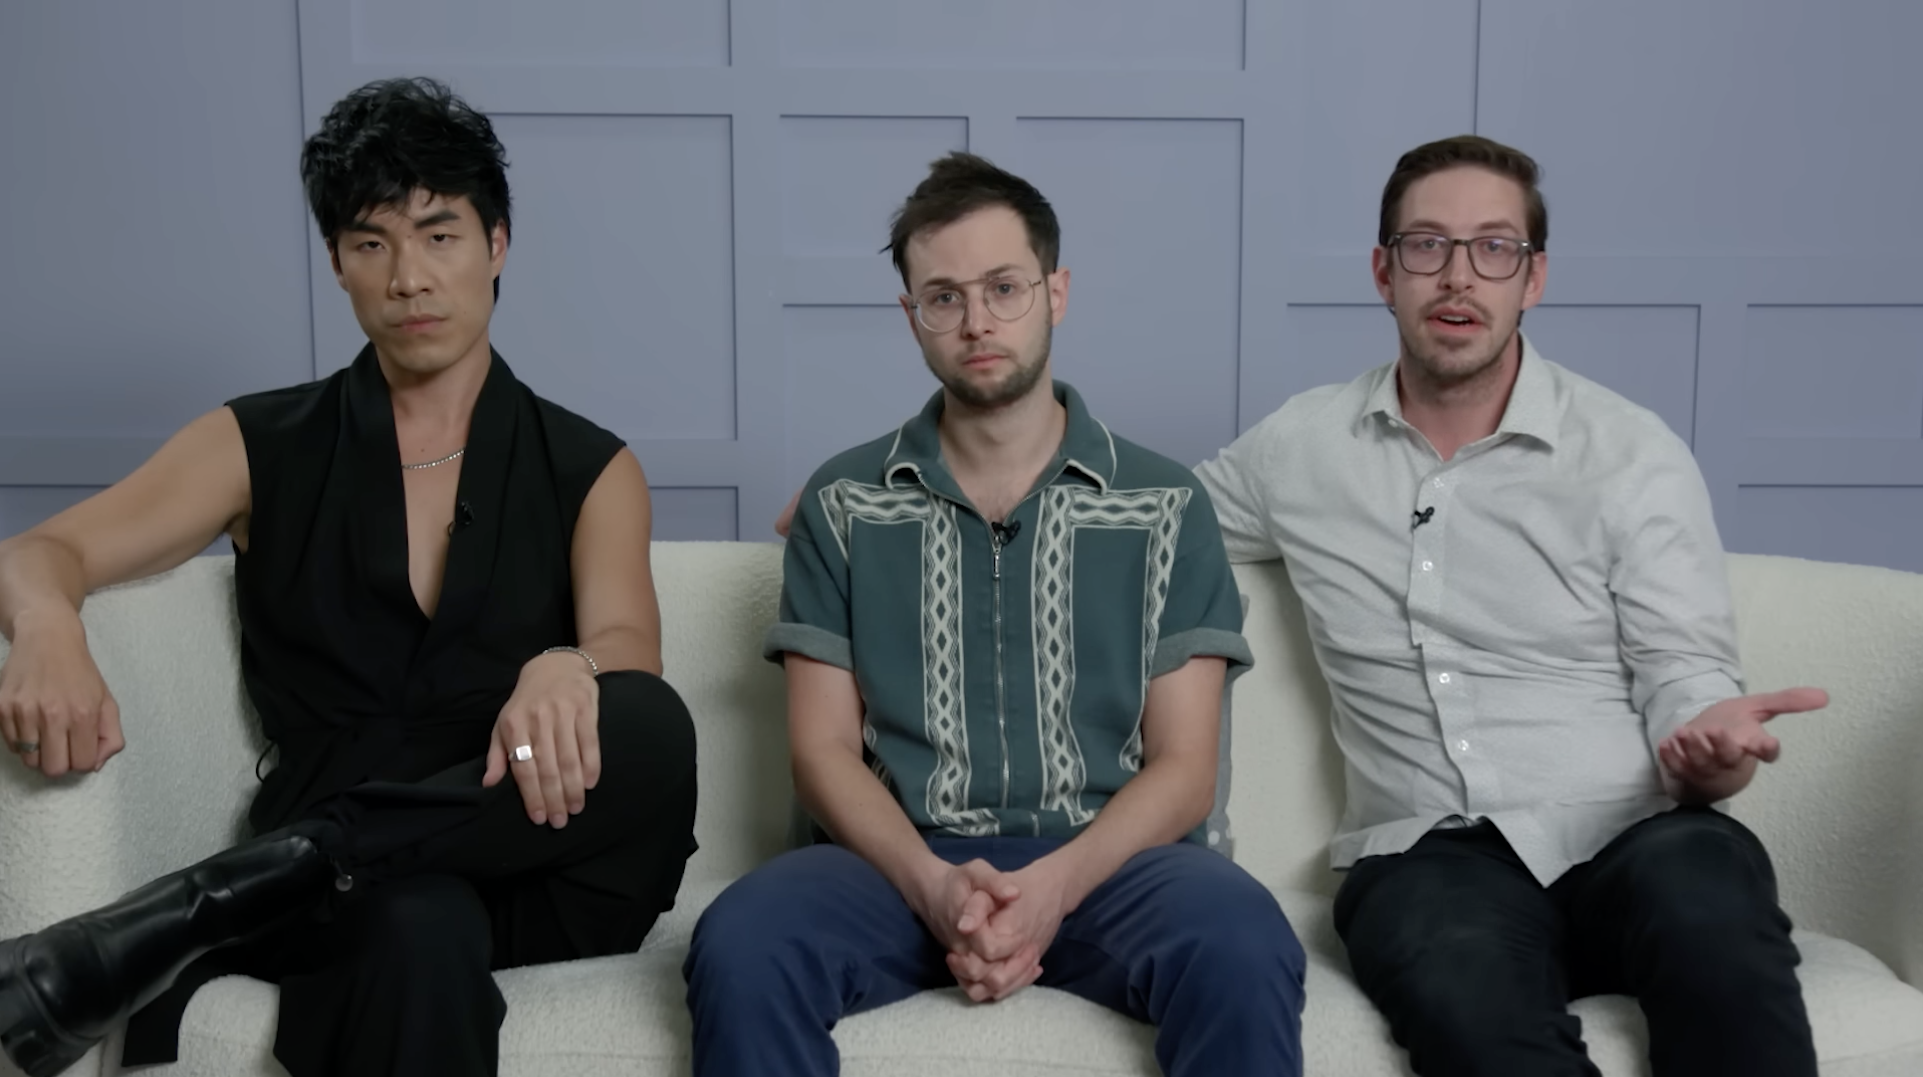 Eugene, Zach, and Keith sitting on a couch as they make their statement